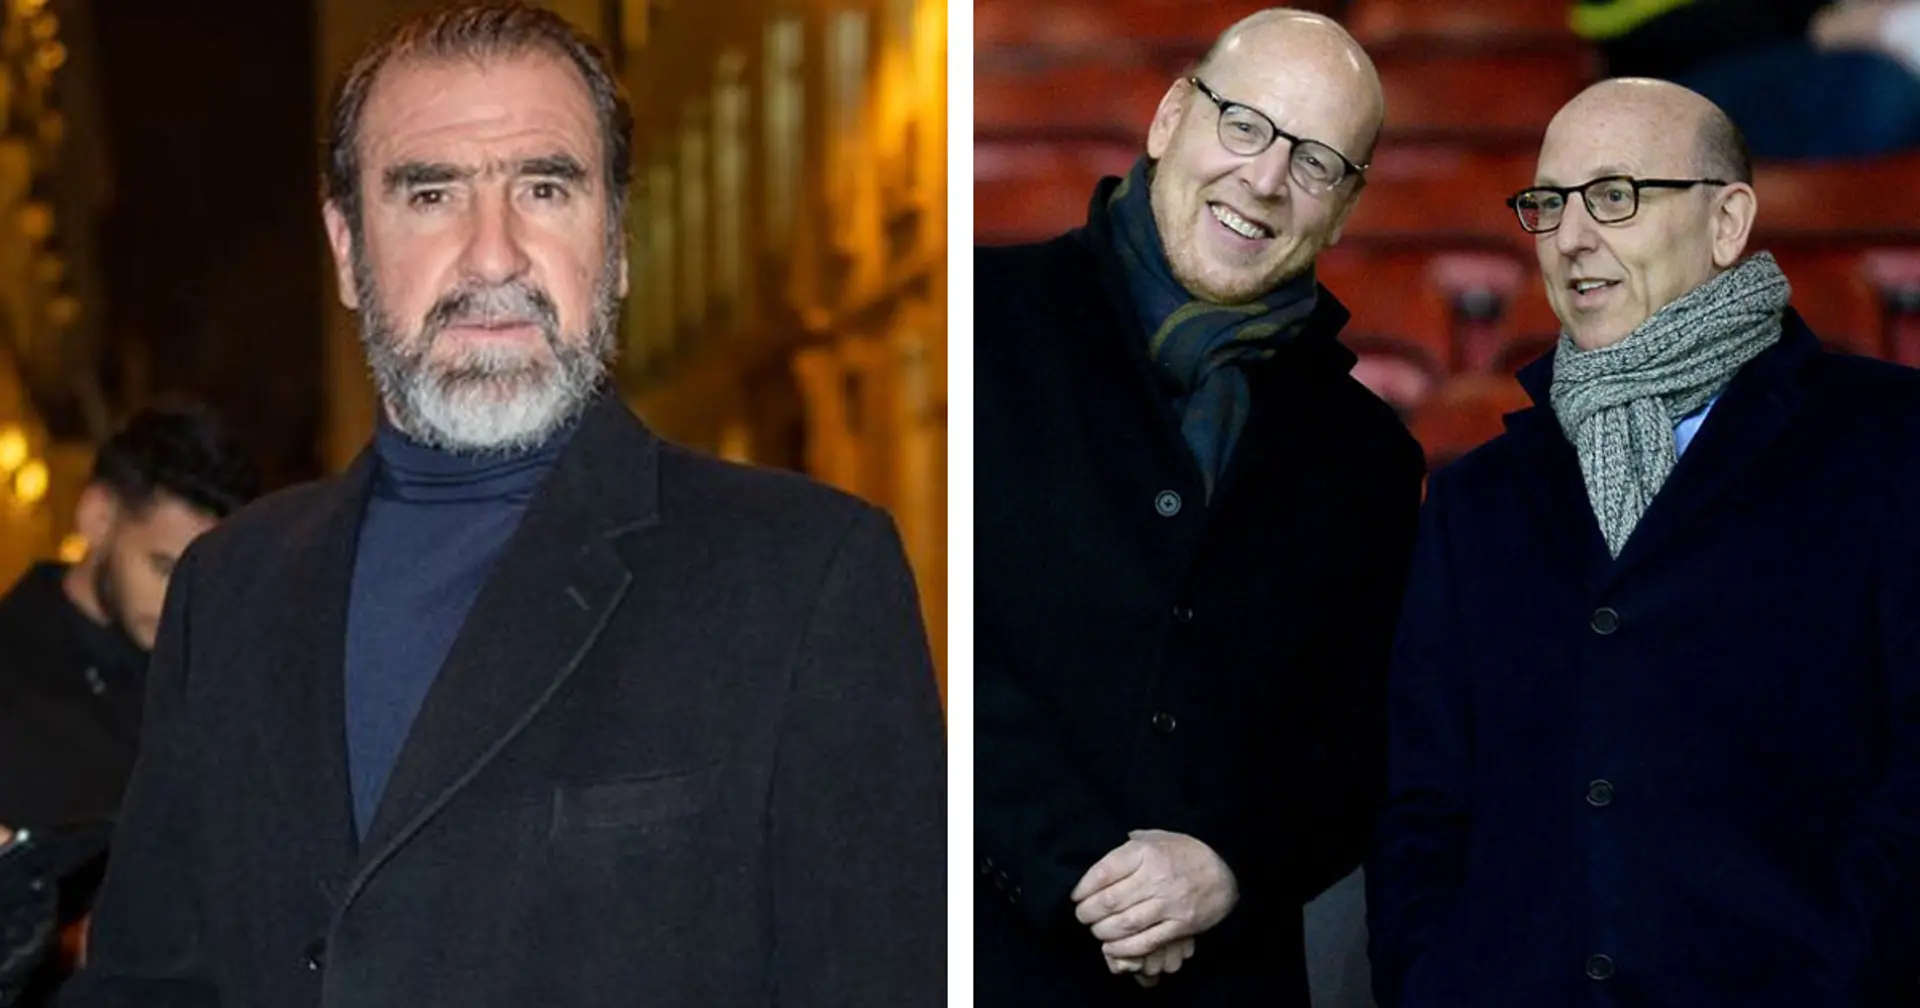 Man United refused to make Eric Cantona 'President of Football' & 3 more big stories you might've missed